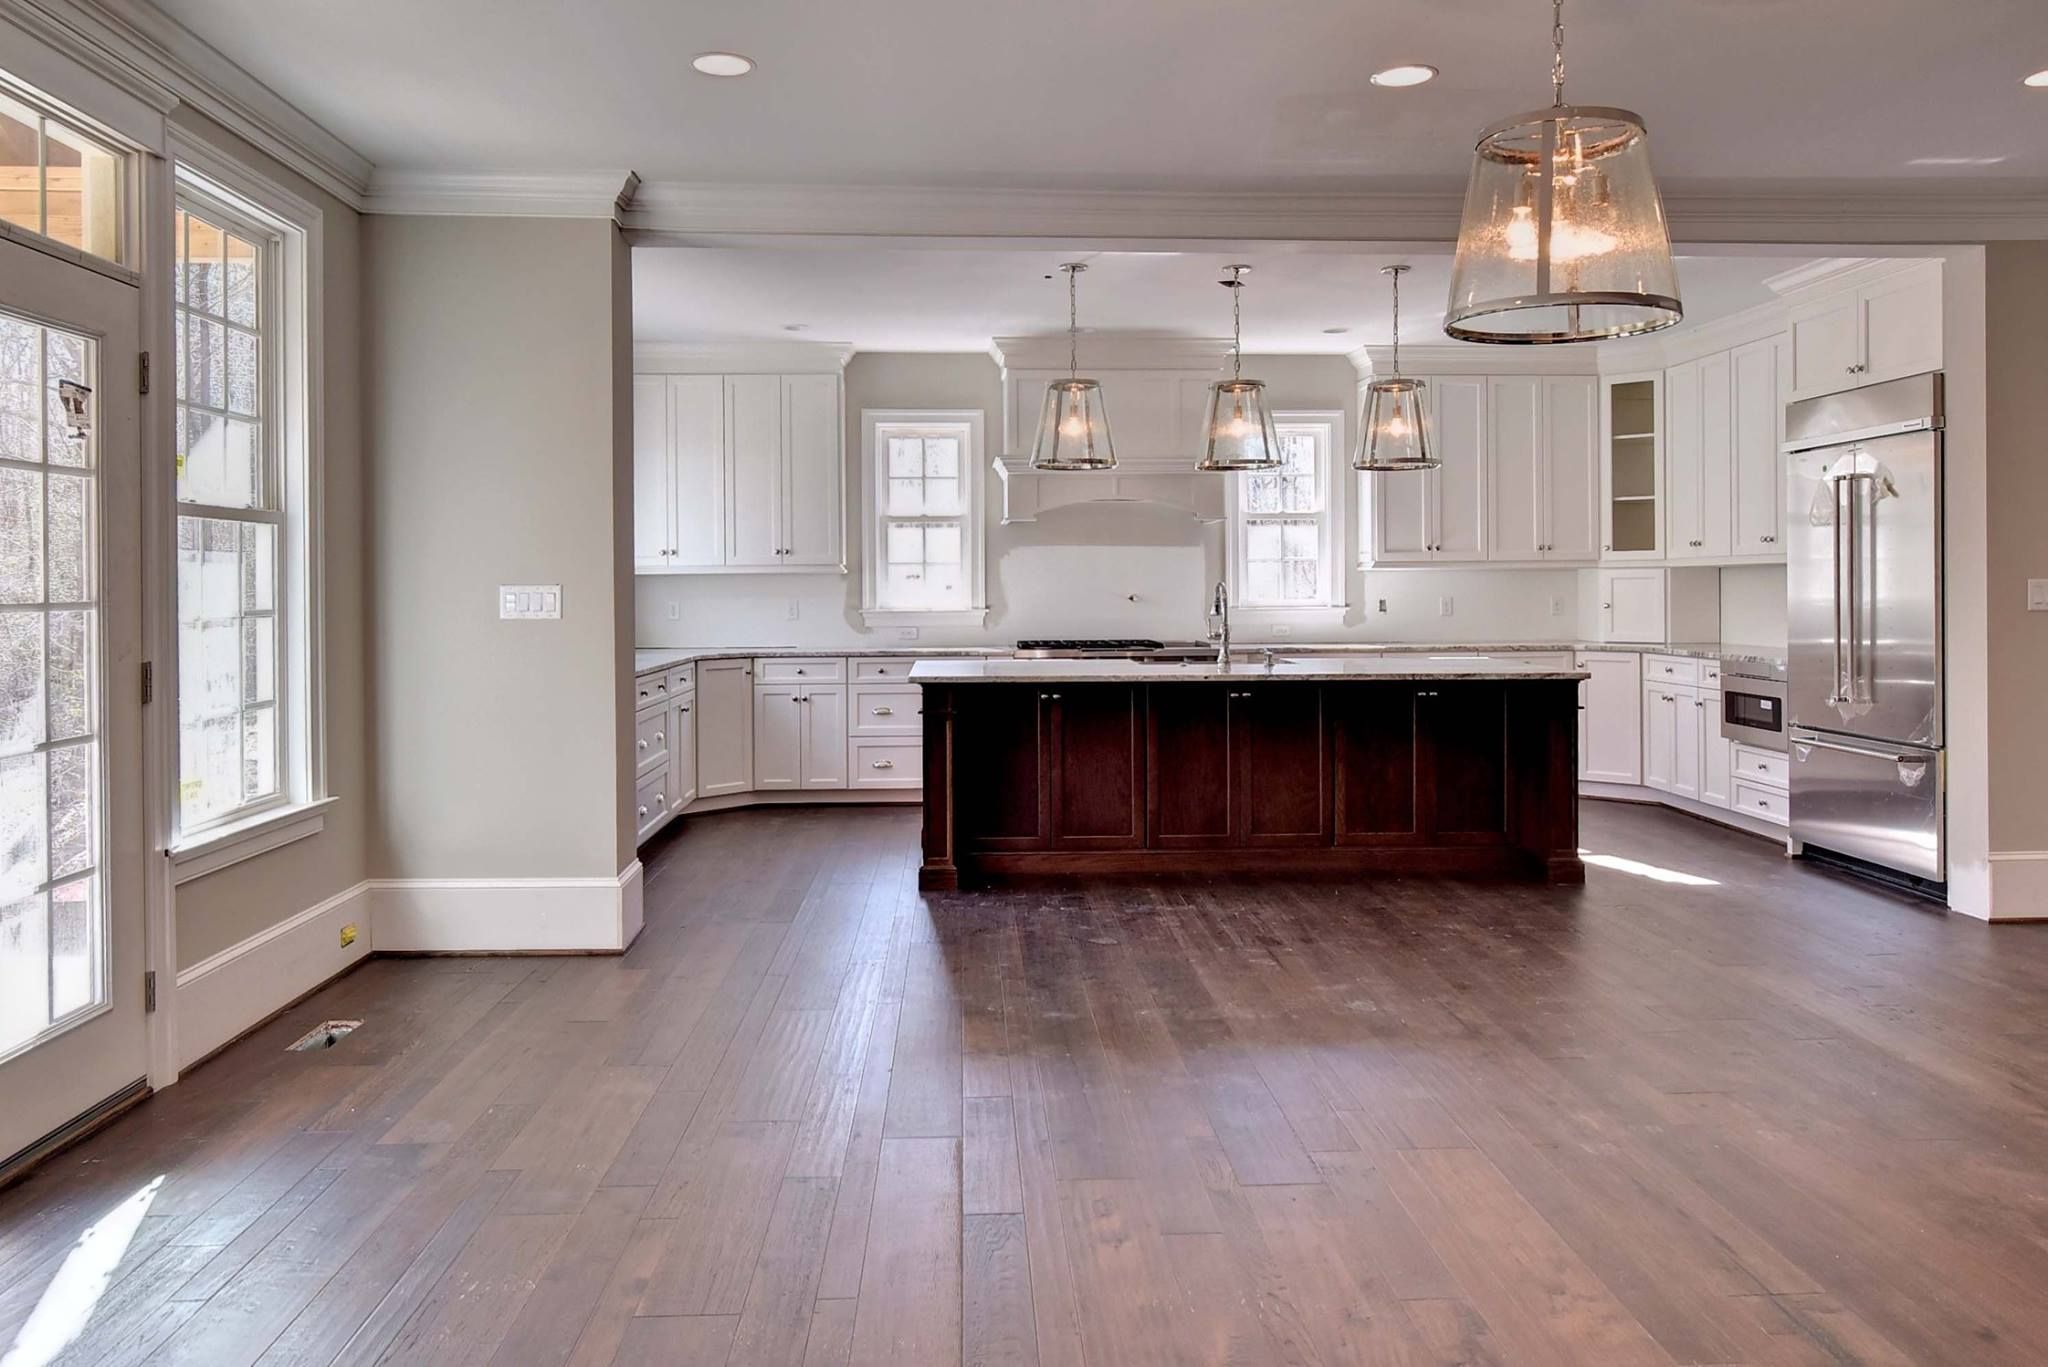 Large kitchen with white cabinetry, large wood island and walls painted Sherwin Williams Agreeable Gray